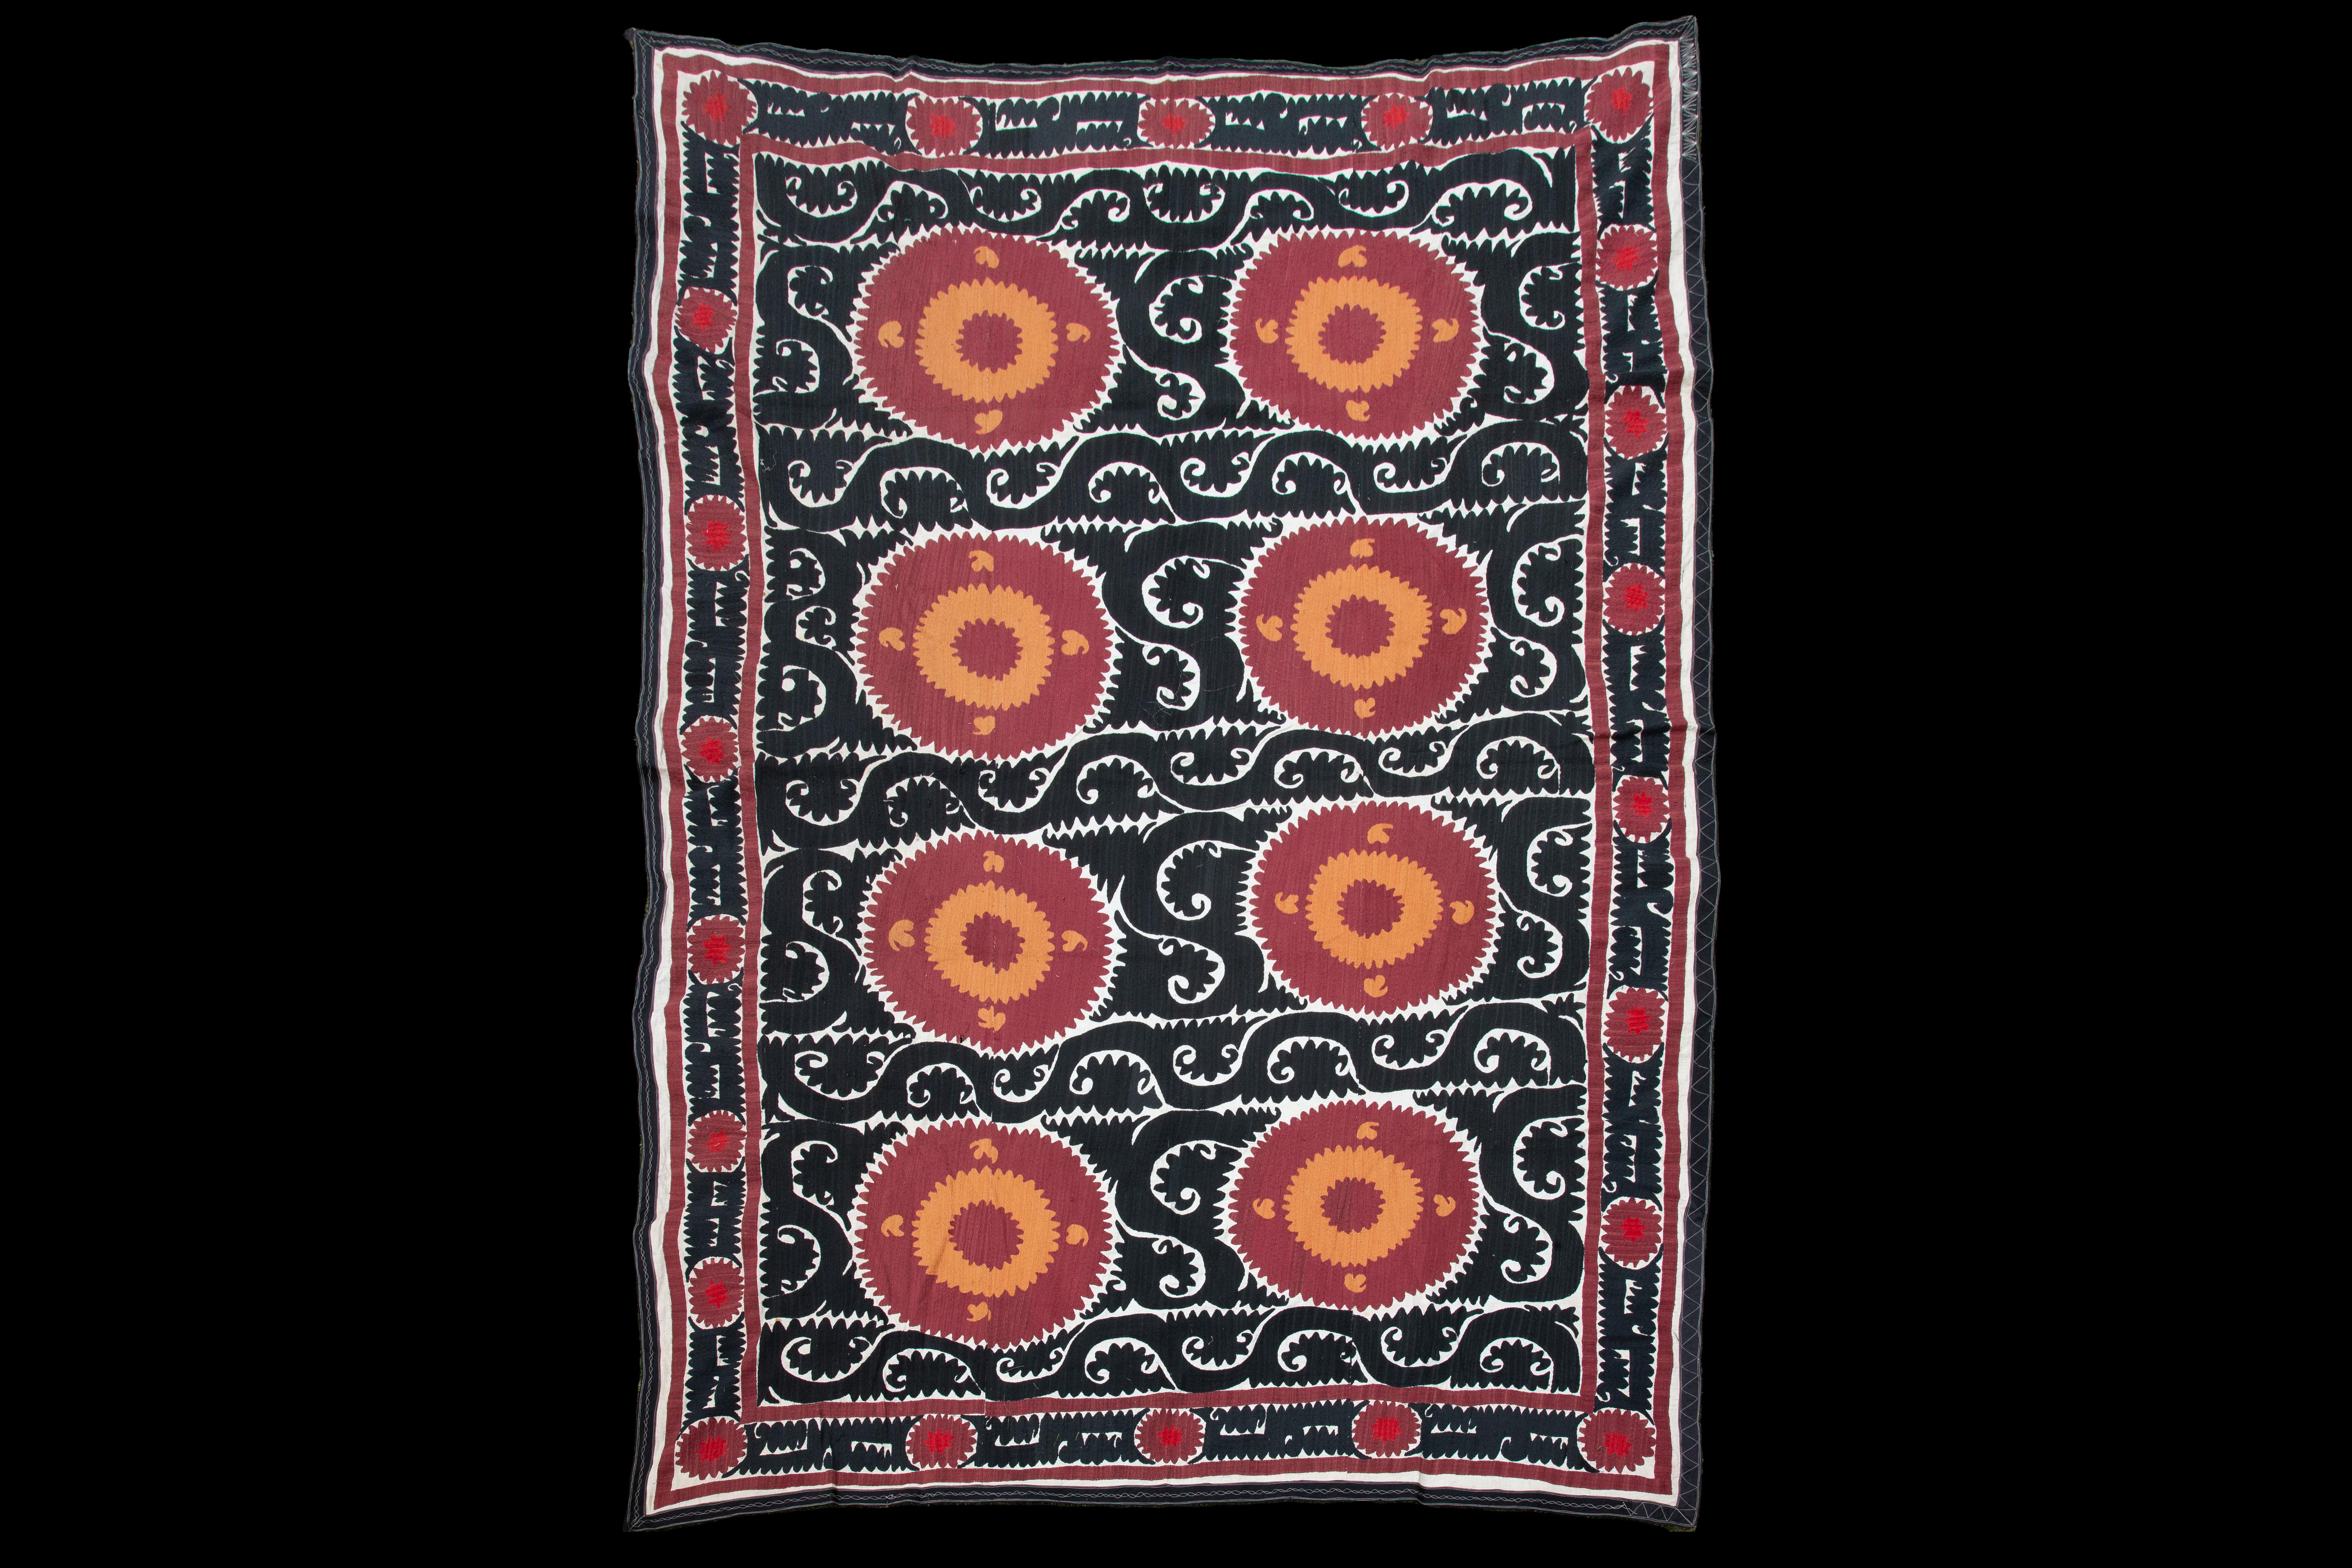 Handmade Vintage Cotton Suzani, Red, Orange, and Black

Richly hand-embroidered vintage Uzbek suzani in iconic black and copper oranges.
Sun burst flowers are ringed with black scrolls on natural cotton.
Cotton embroidery in tight stitches give